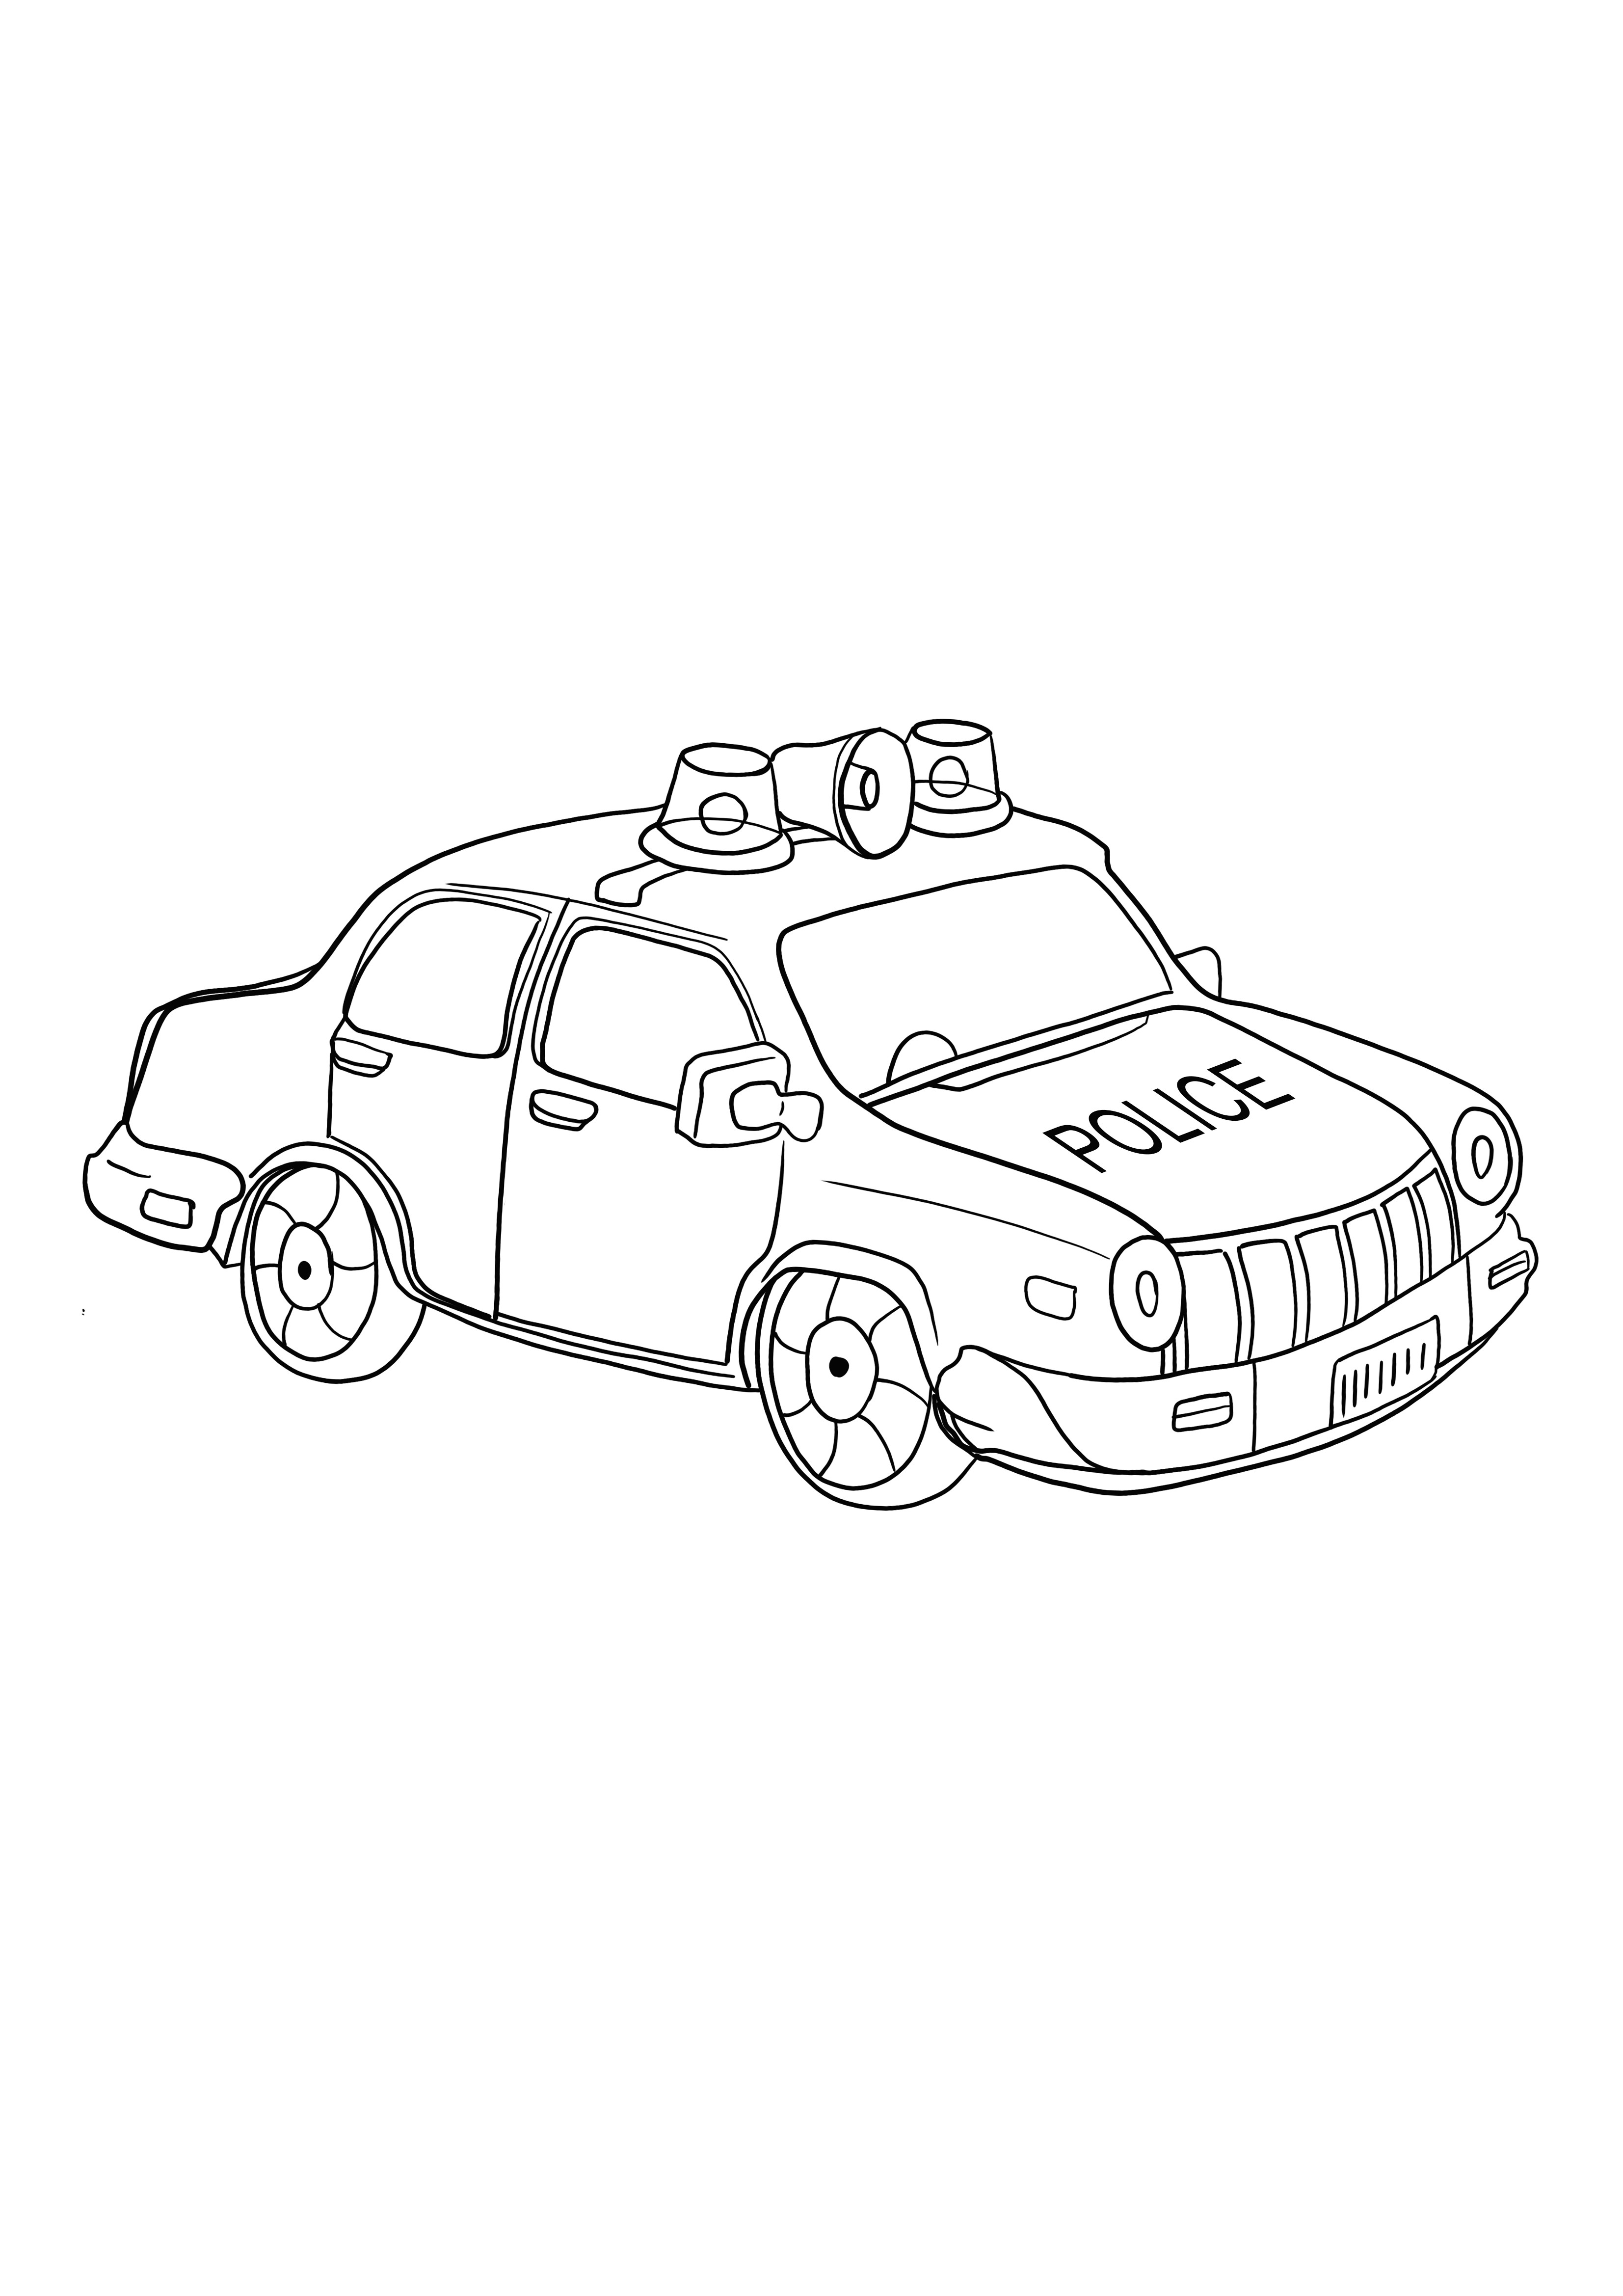 police car for free coloring page